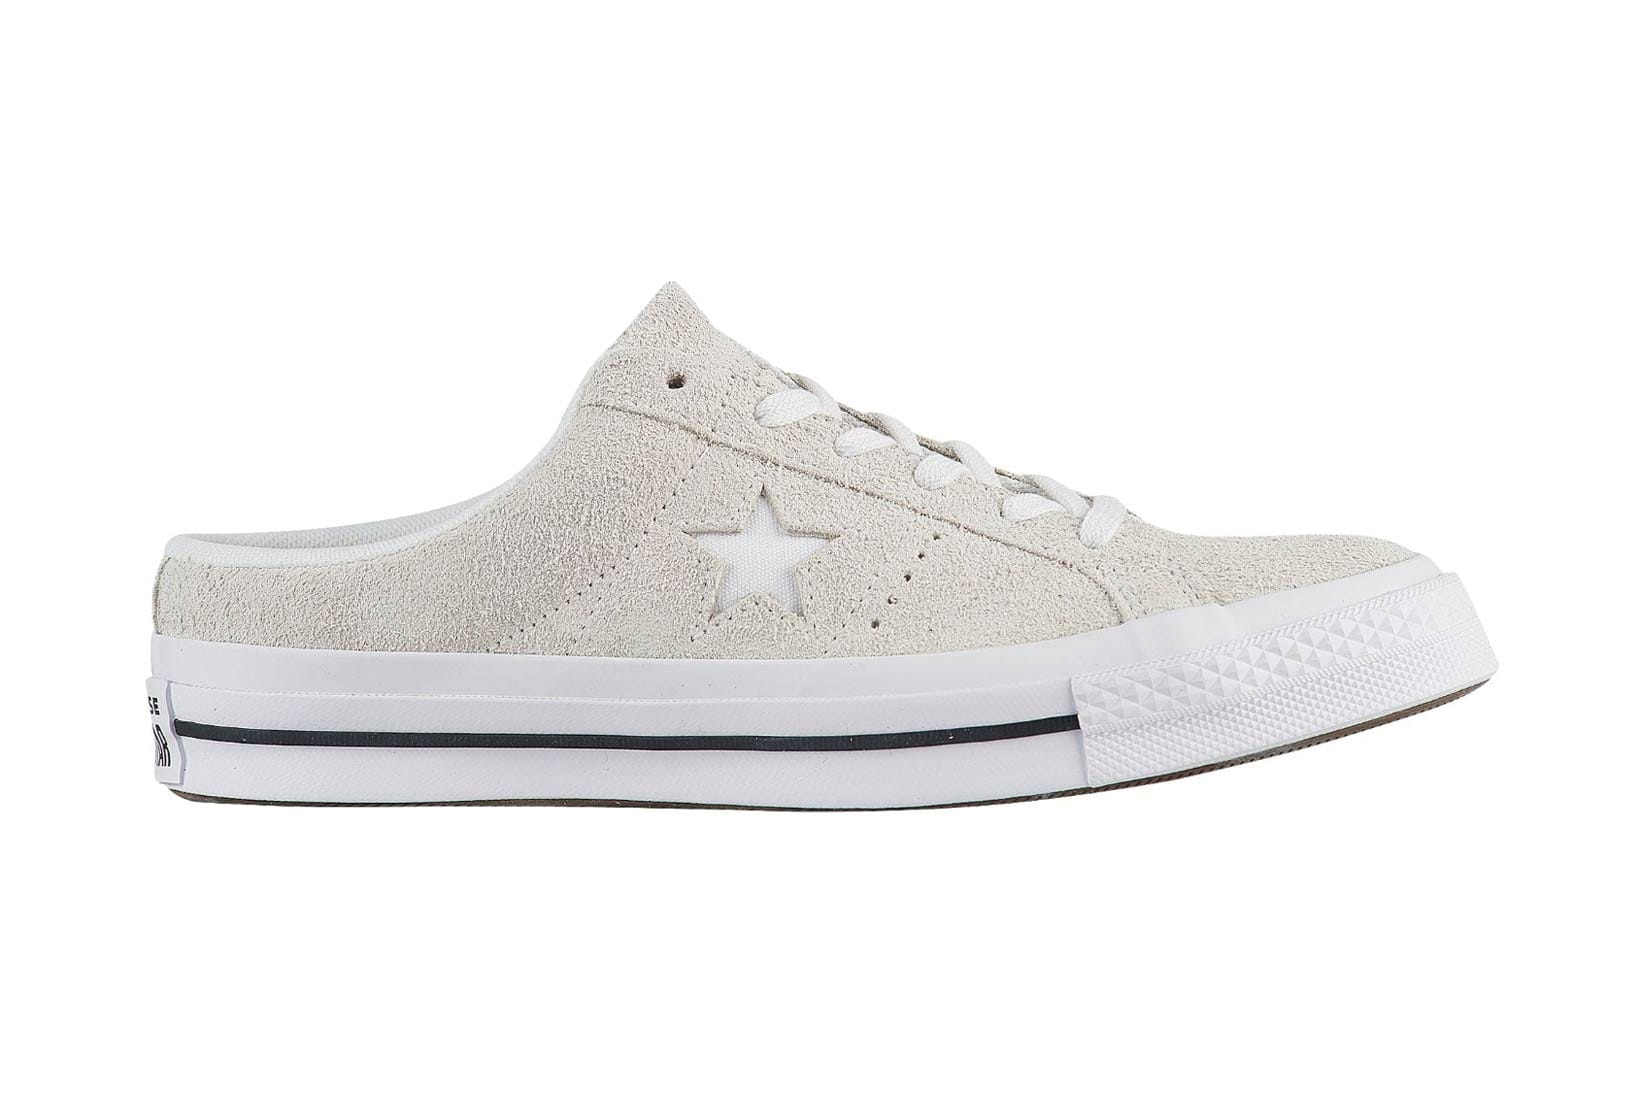 Converse's One Star Mule in Black and 